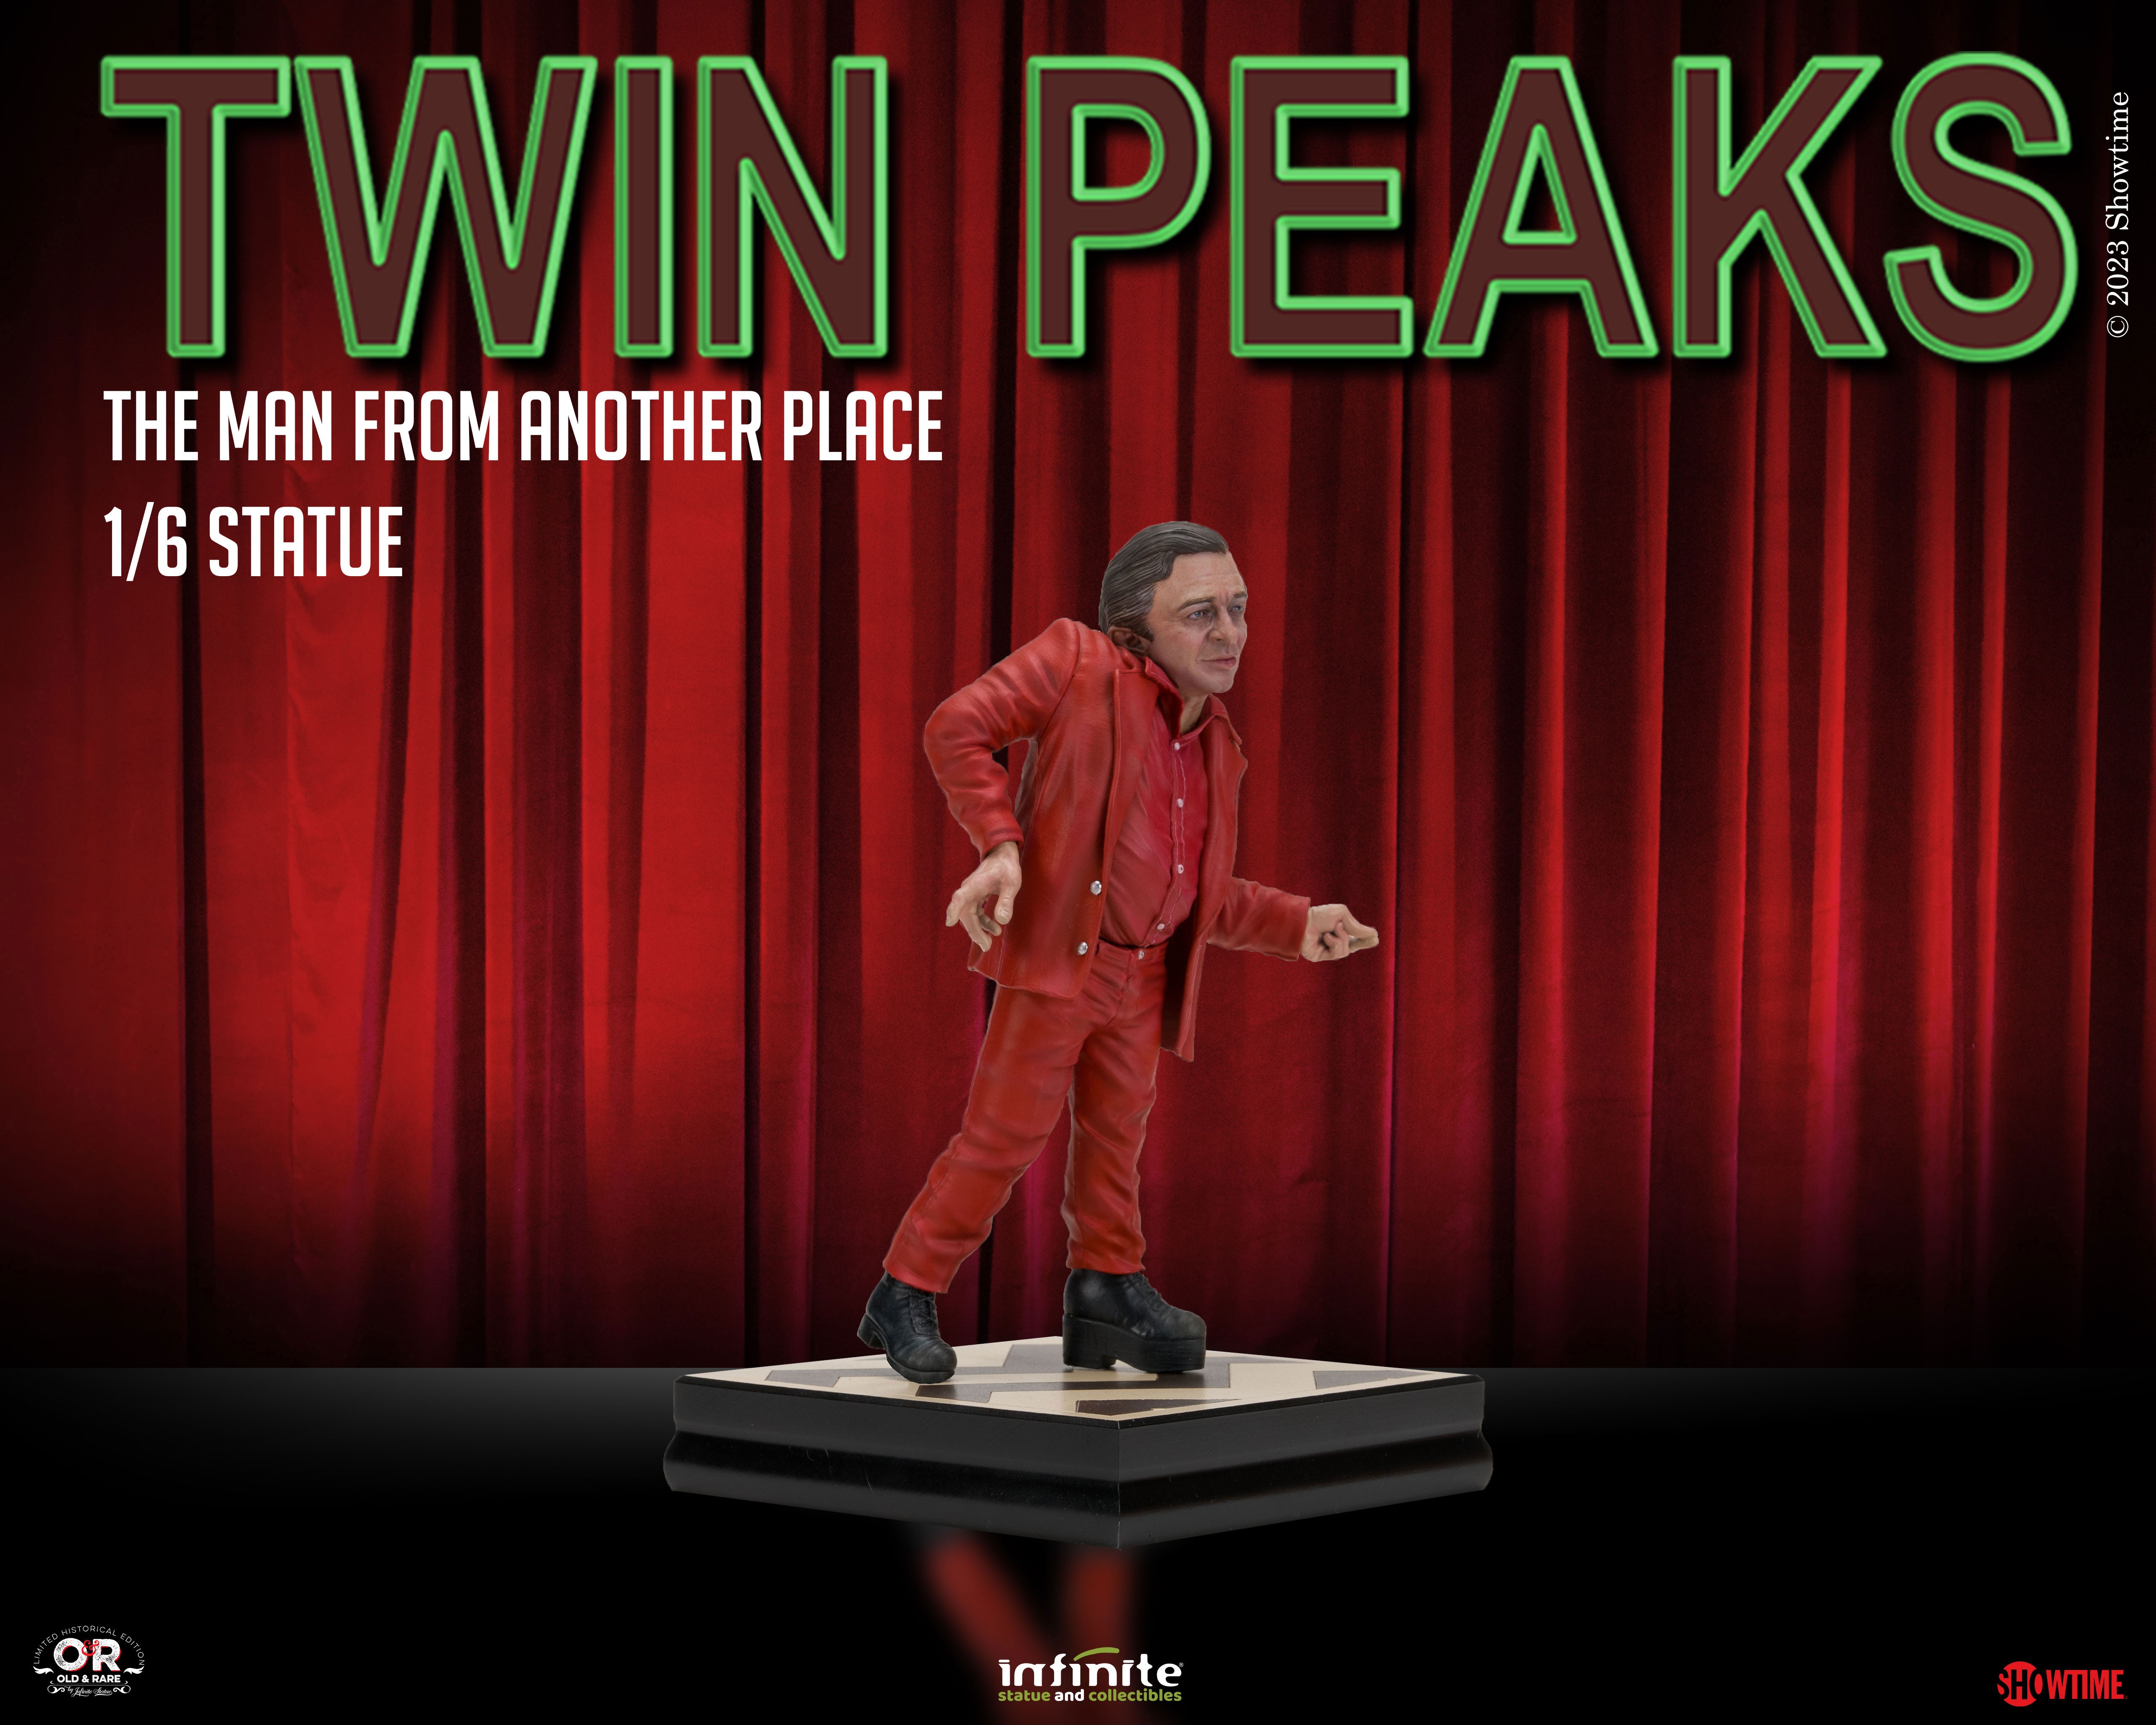 https://www.infinitestatue.com/2394/twin-peaks-the-man-from-another-place-16-statue.jpg